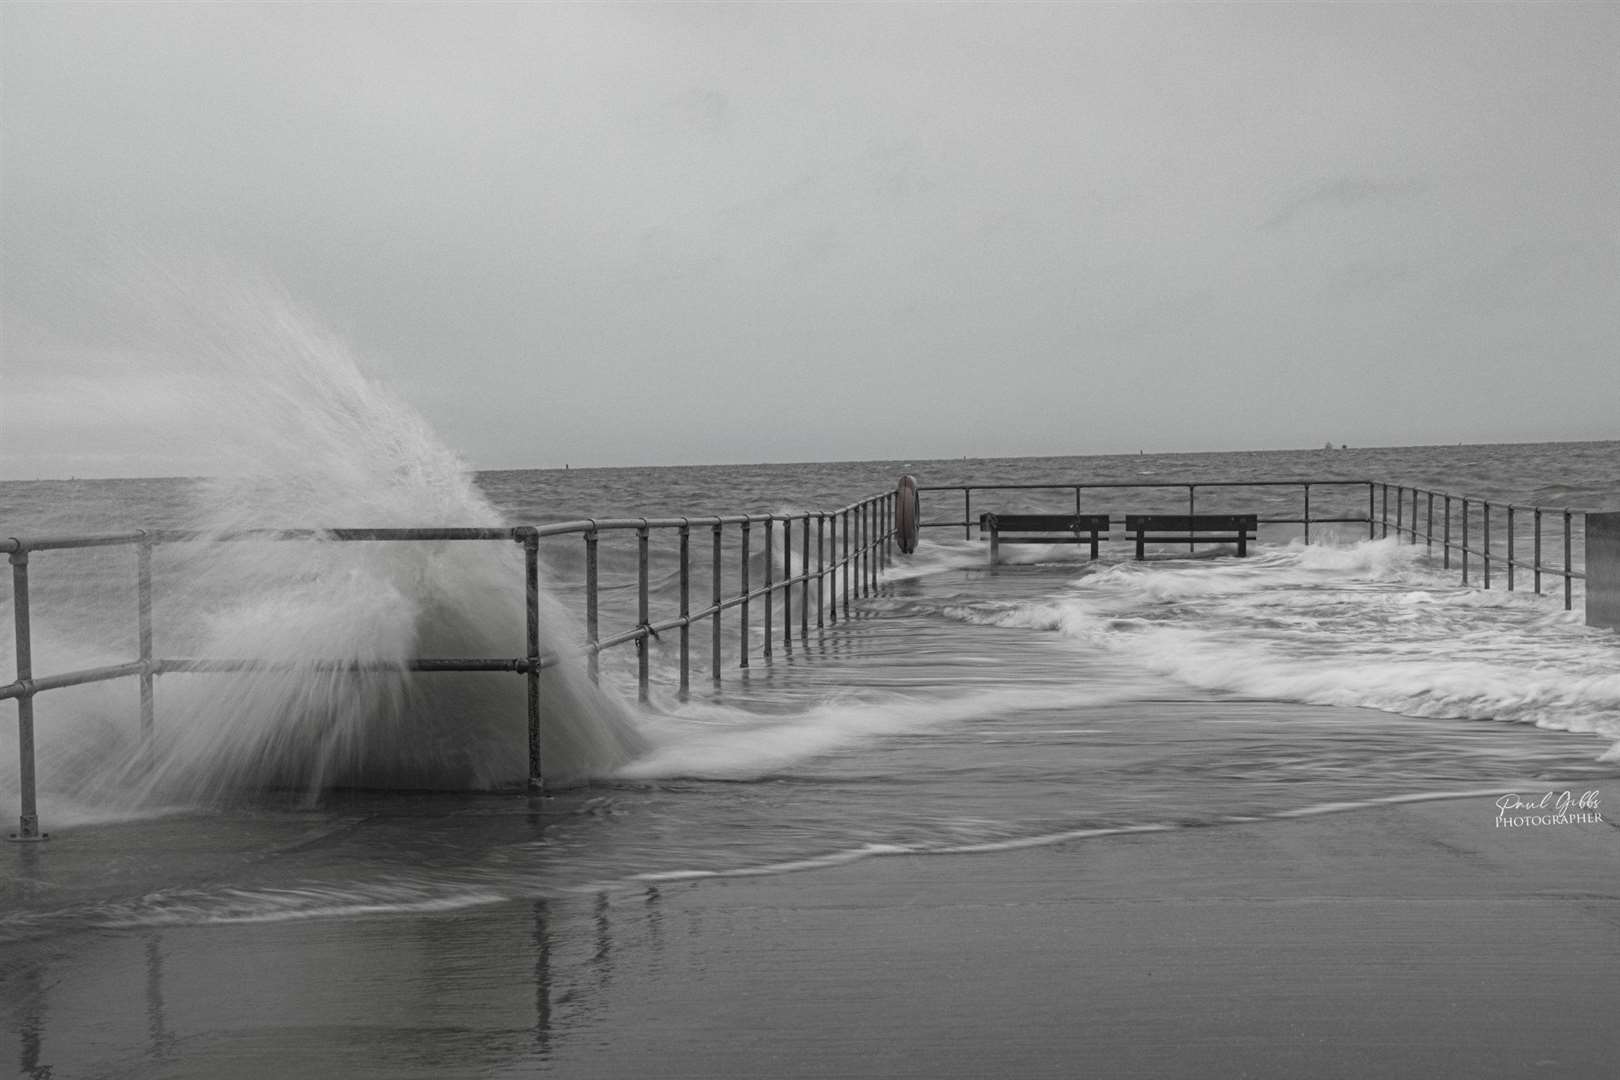 High tide whipped up by strong winds leads to waves crashing over Neptune Jetty at Sheerness on the Isle of Sheppey. Picture: Paul Gibbs